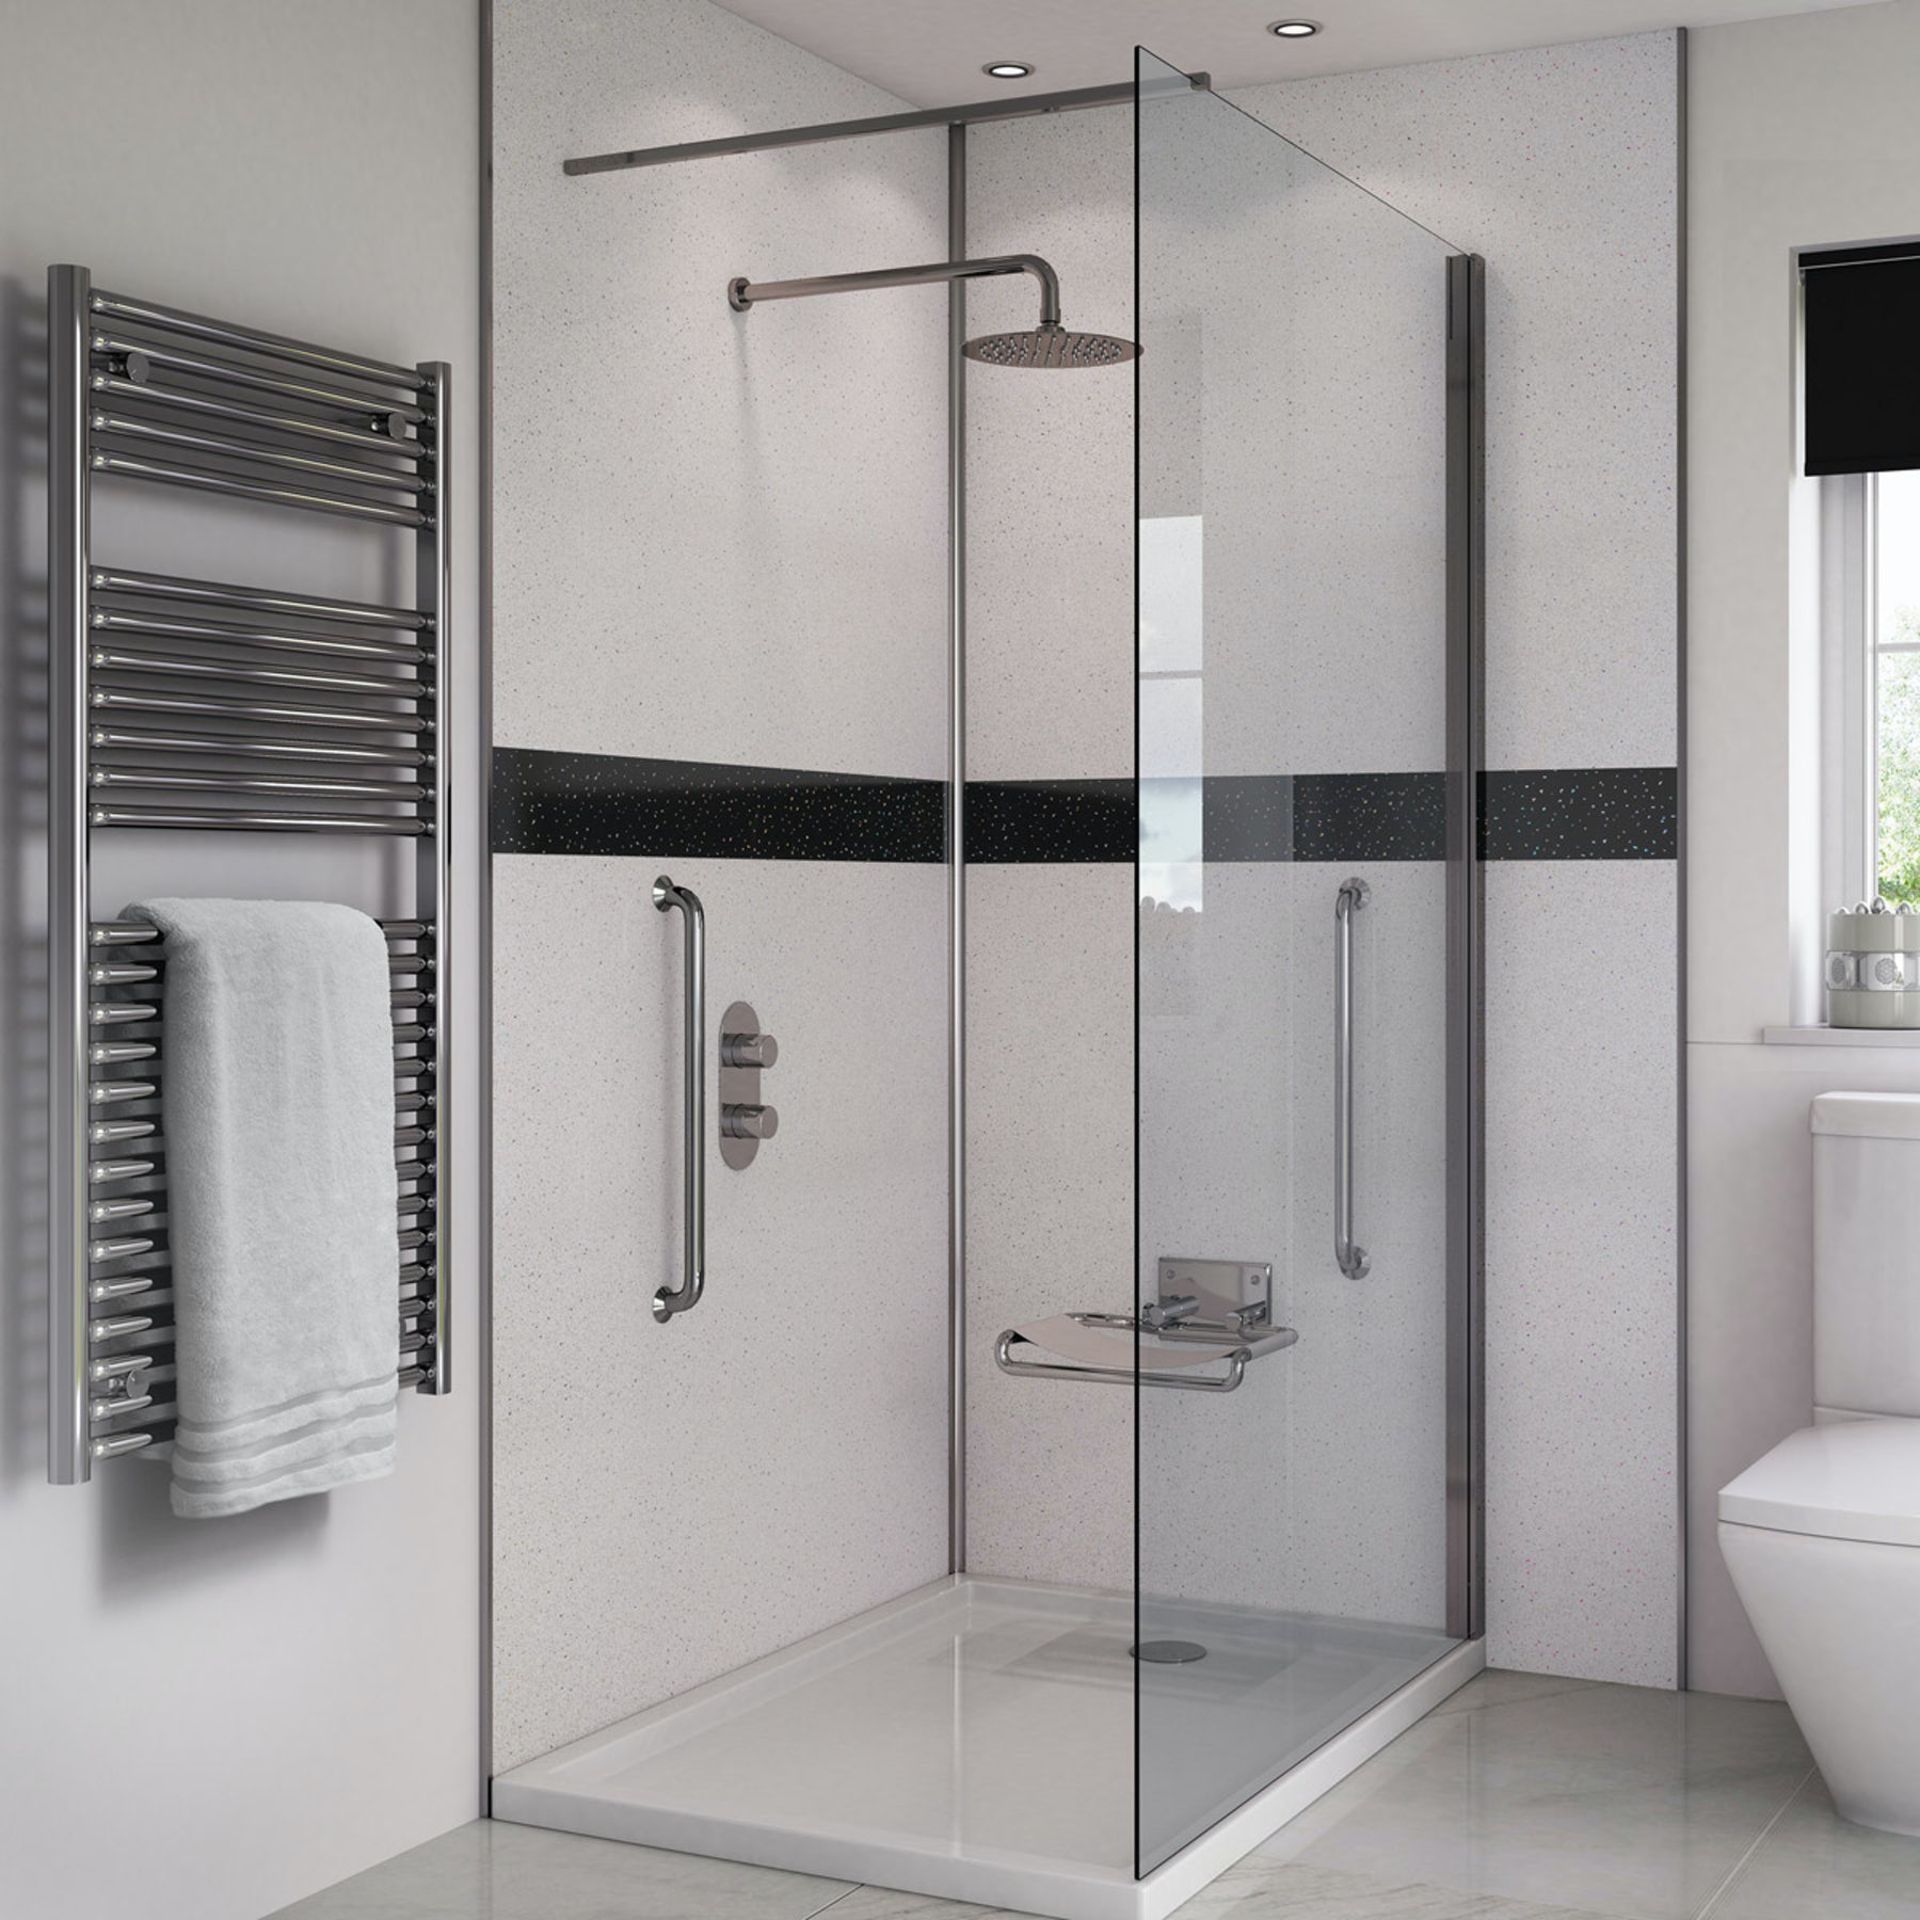 Splash Panel 2 sided shower wall kit in Artic Sparkle gloss, new and boxed, the kit contains 2 - Image 3 of 5